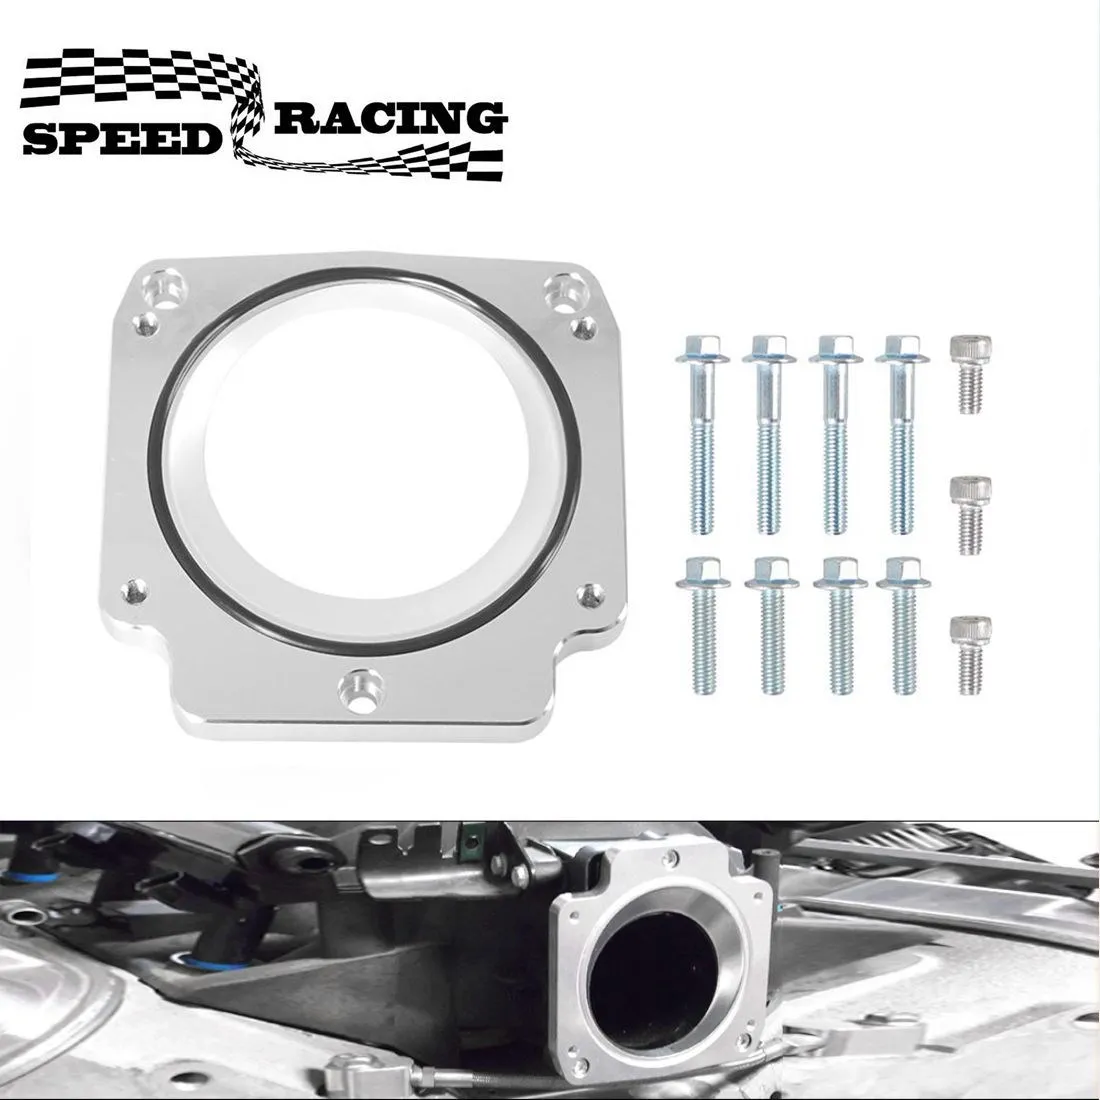 

Throttle Body Adapter Plate 551513 LS1 75mm 3 Bolts to 4 Bolts 92mm LS3 LM7 LR4 LQ4 LS6 L59 LQ9 LM4 L33 LSX 4.8L 5.3L 5.7L 6.0L